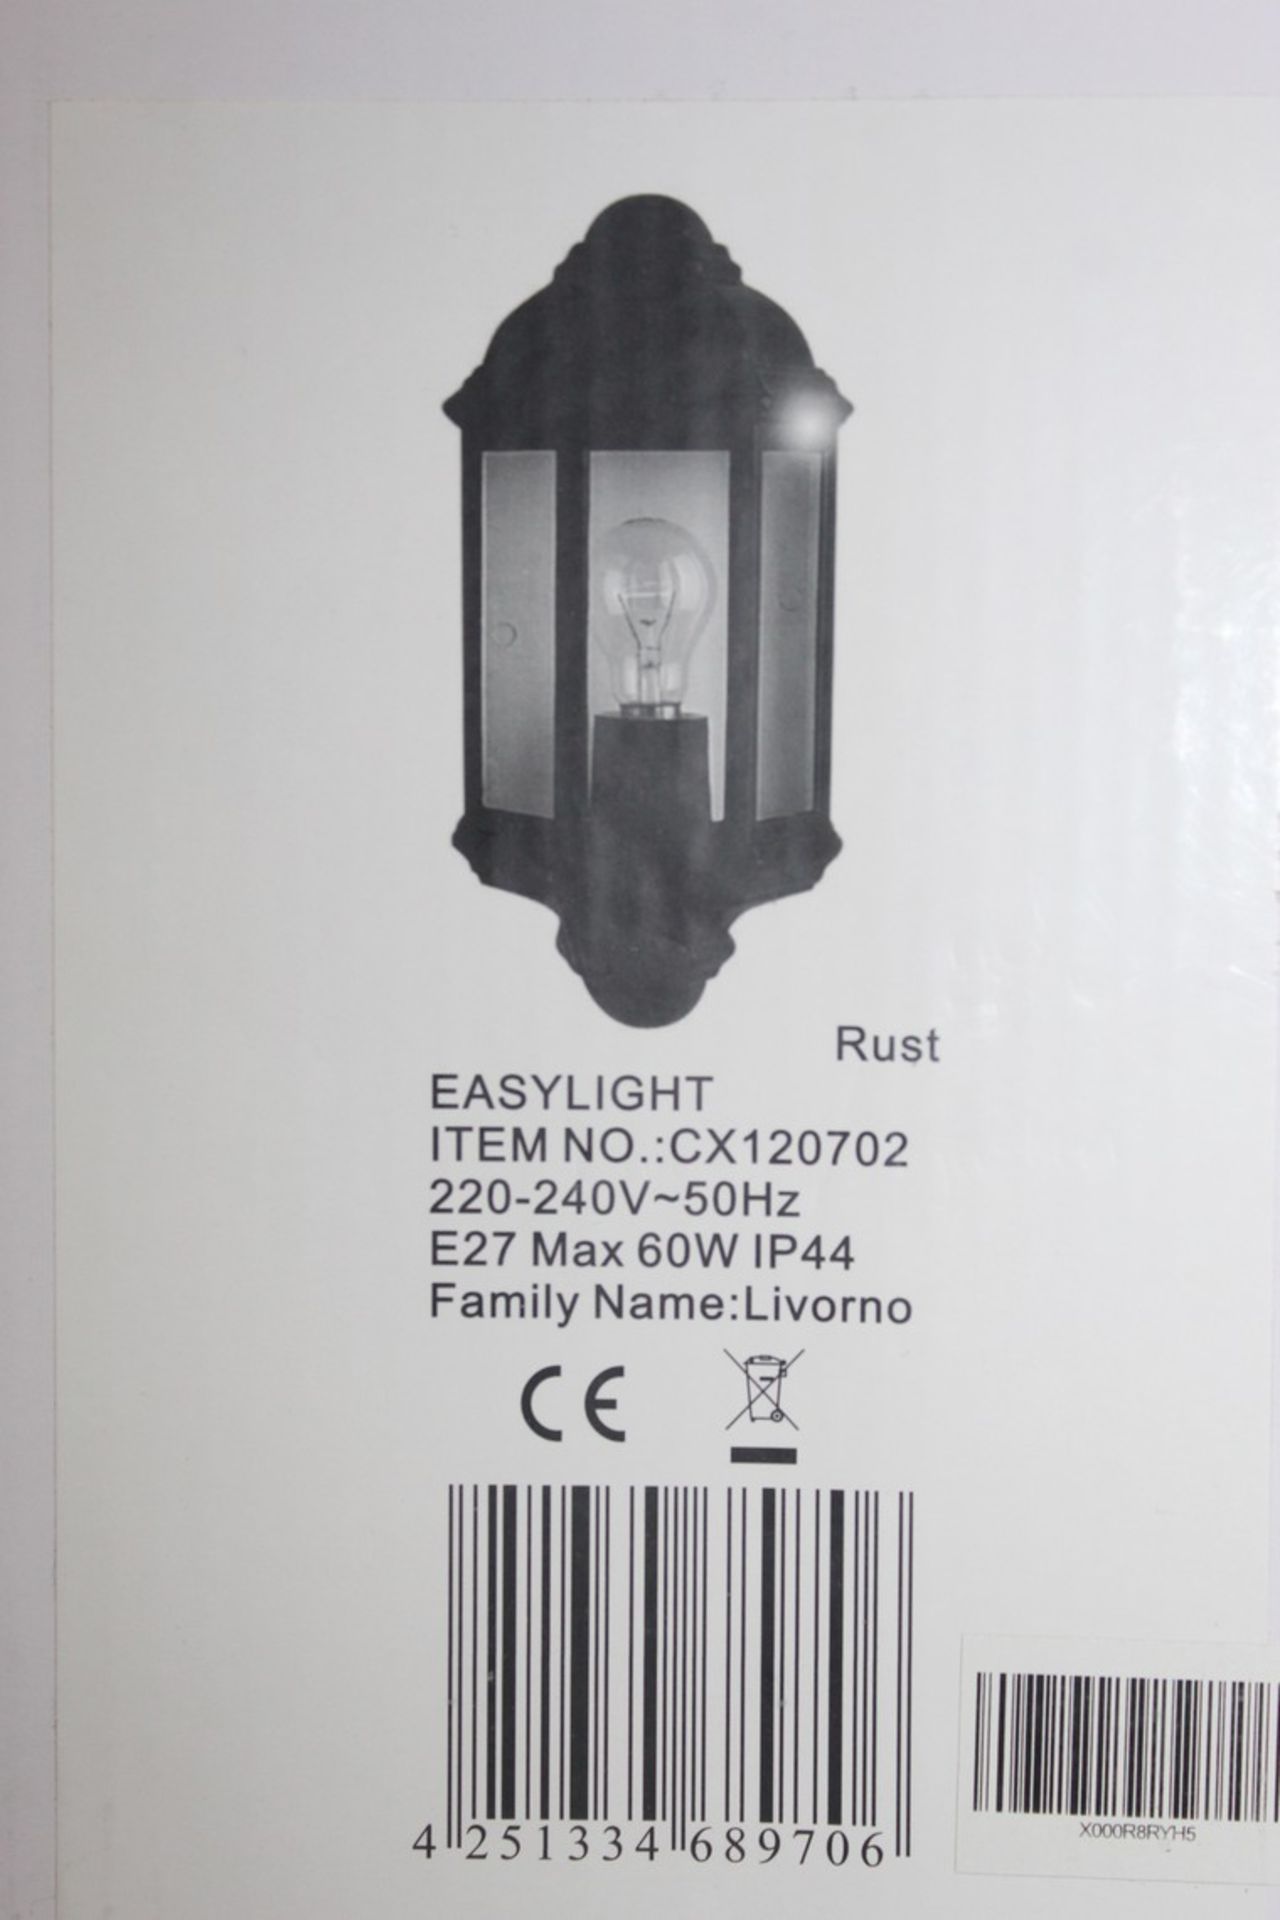 Boxed Dark Lighting Levarno Agustin Outdoor Wall Light RRP £40 (14532) (Pictures Are For